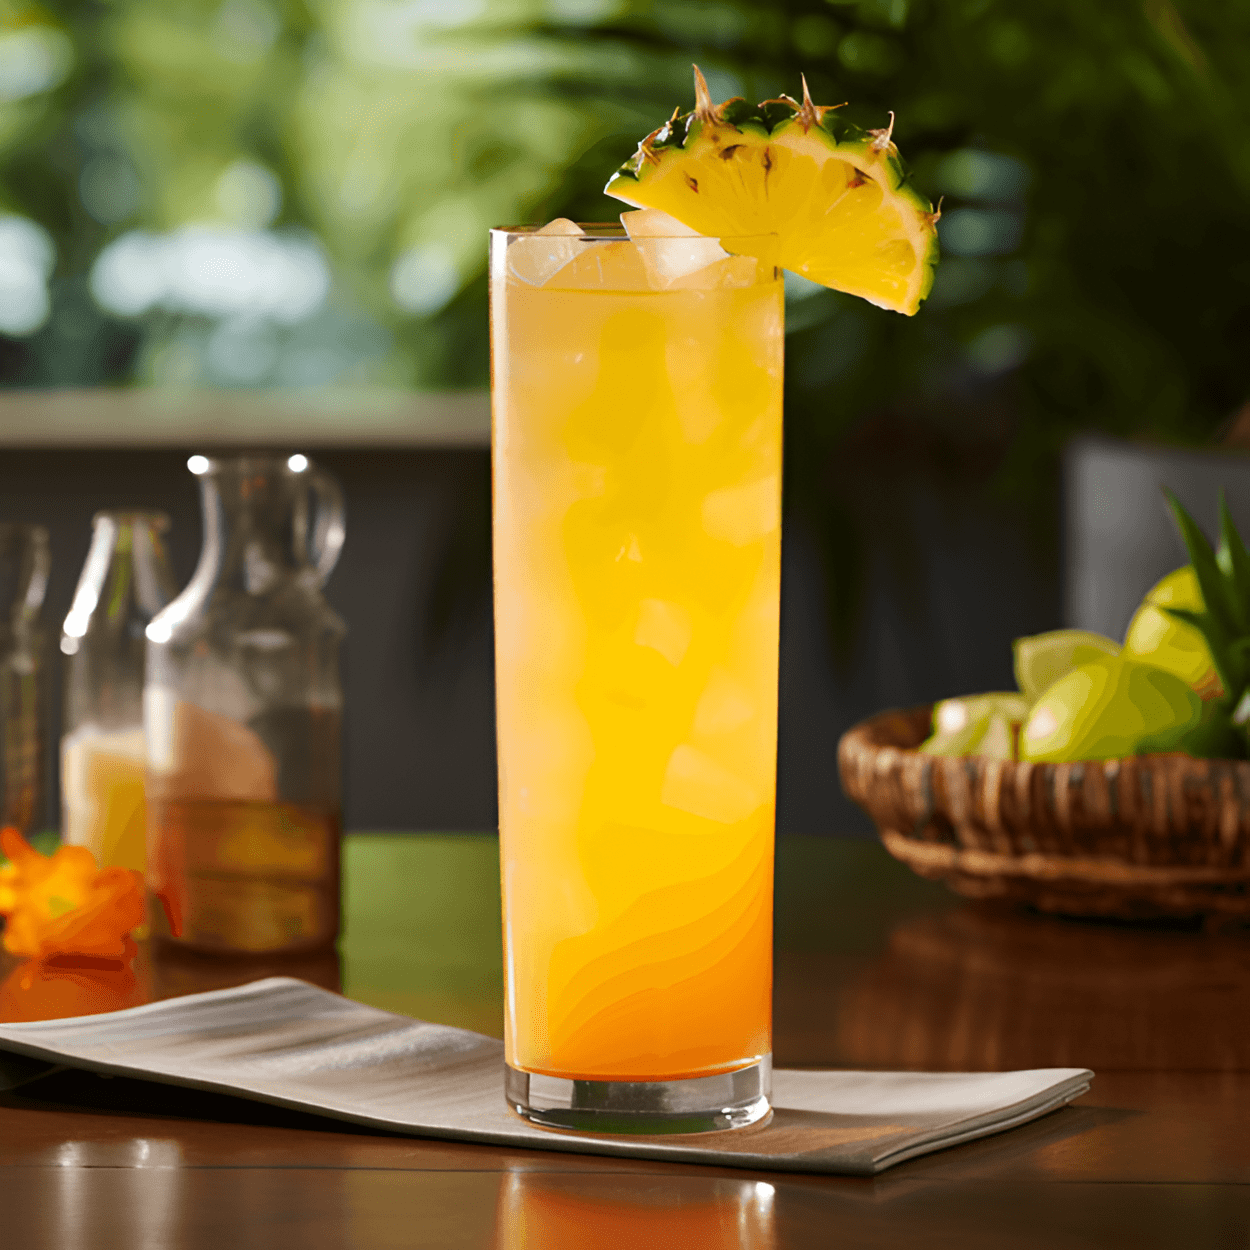 Walking With Jesus Cocktail Recipe - The 'Walking With Jesus' cocktail is a delightful blend of sweet and sour flavors. The tequila gives it a strong, fiery kick, while the pineapple juice adds a sweet, tropical touch. The lime juice and simple syrup balance out the flavors, adding a tangy freshness and a hint of sweetness. It's a refreshing, well-balanced cocktail that leaves a pleasant aftertaste.